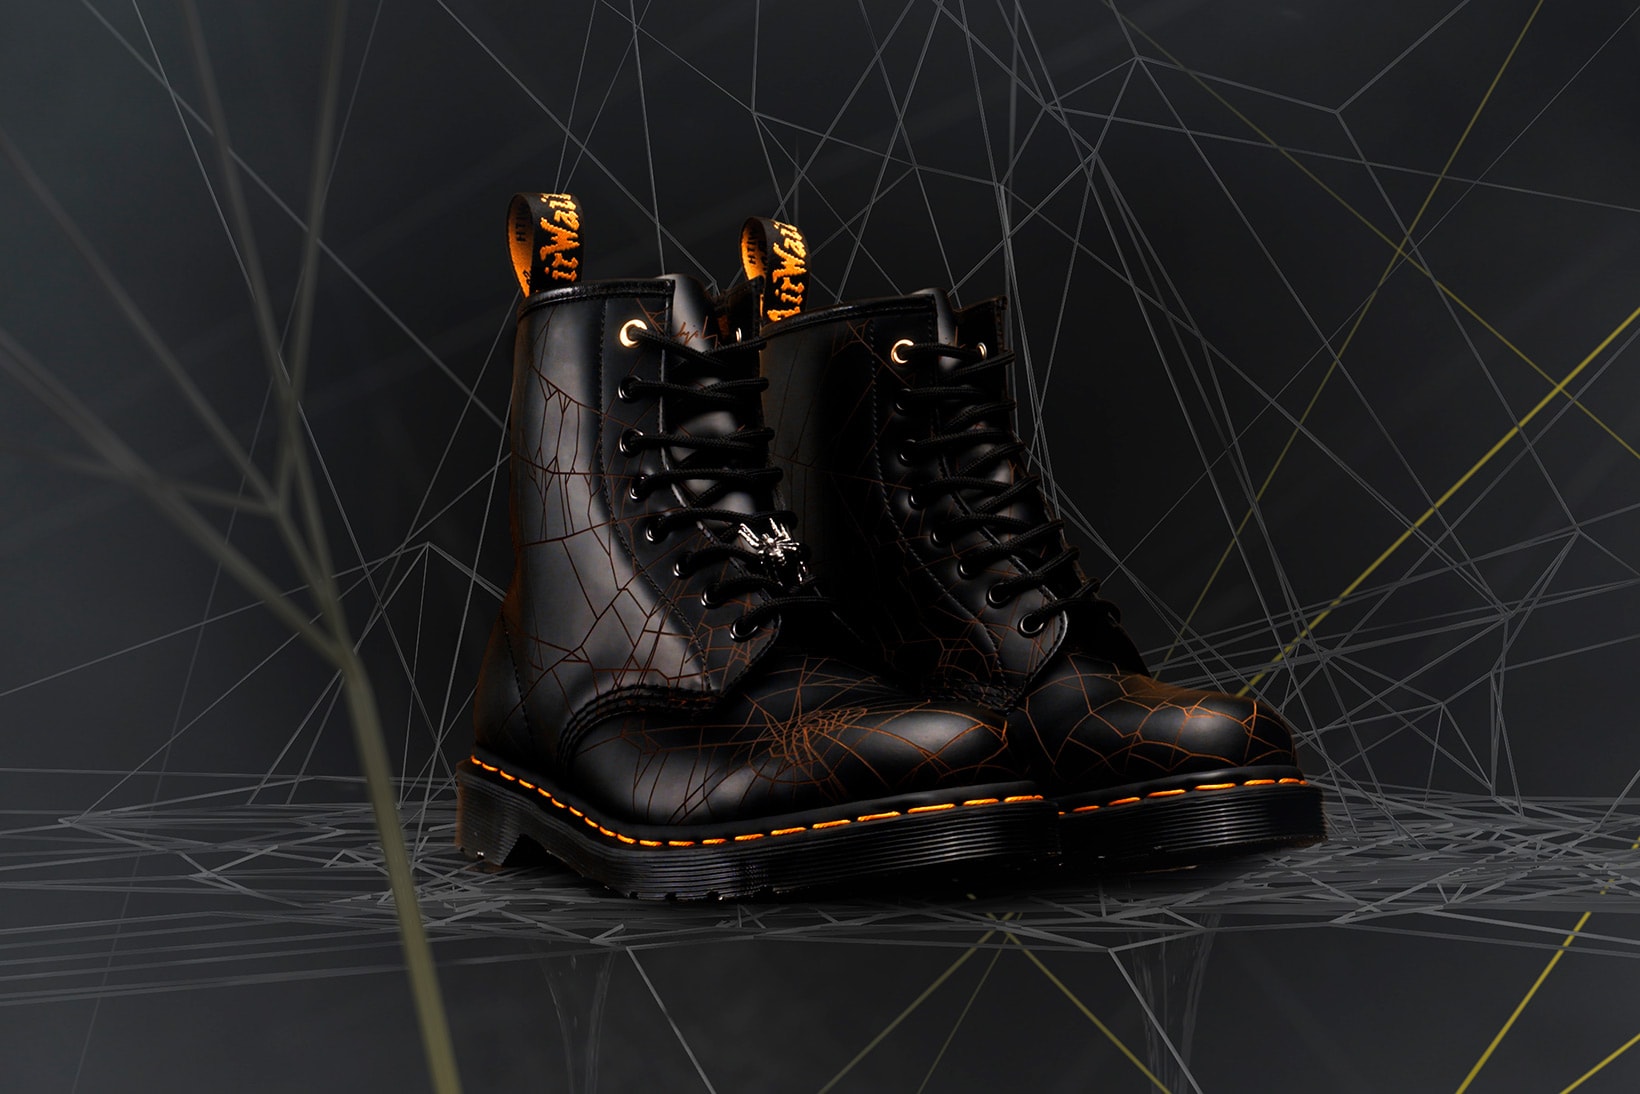 Dr. Martens Yohji Yamamoto Collaboration Boots 1460 Remastered 60th Anniversary Collection